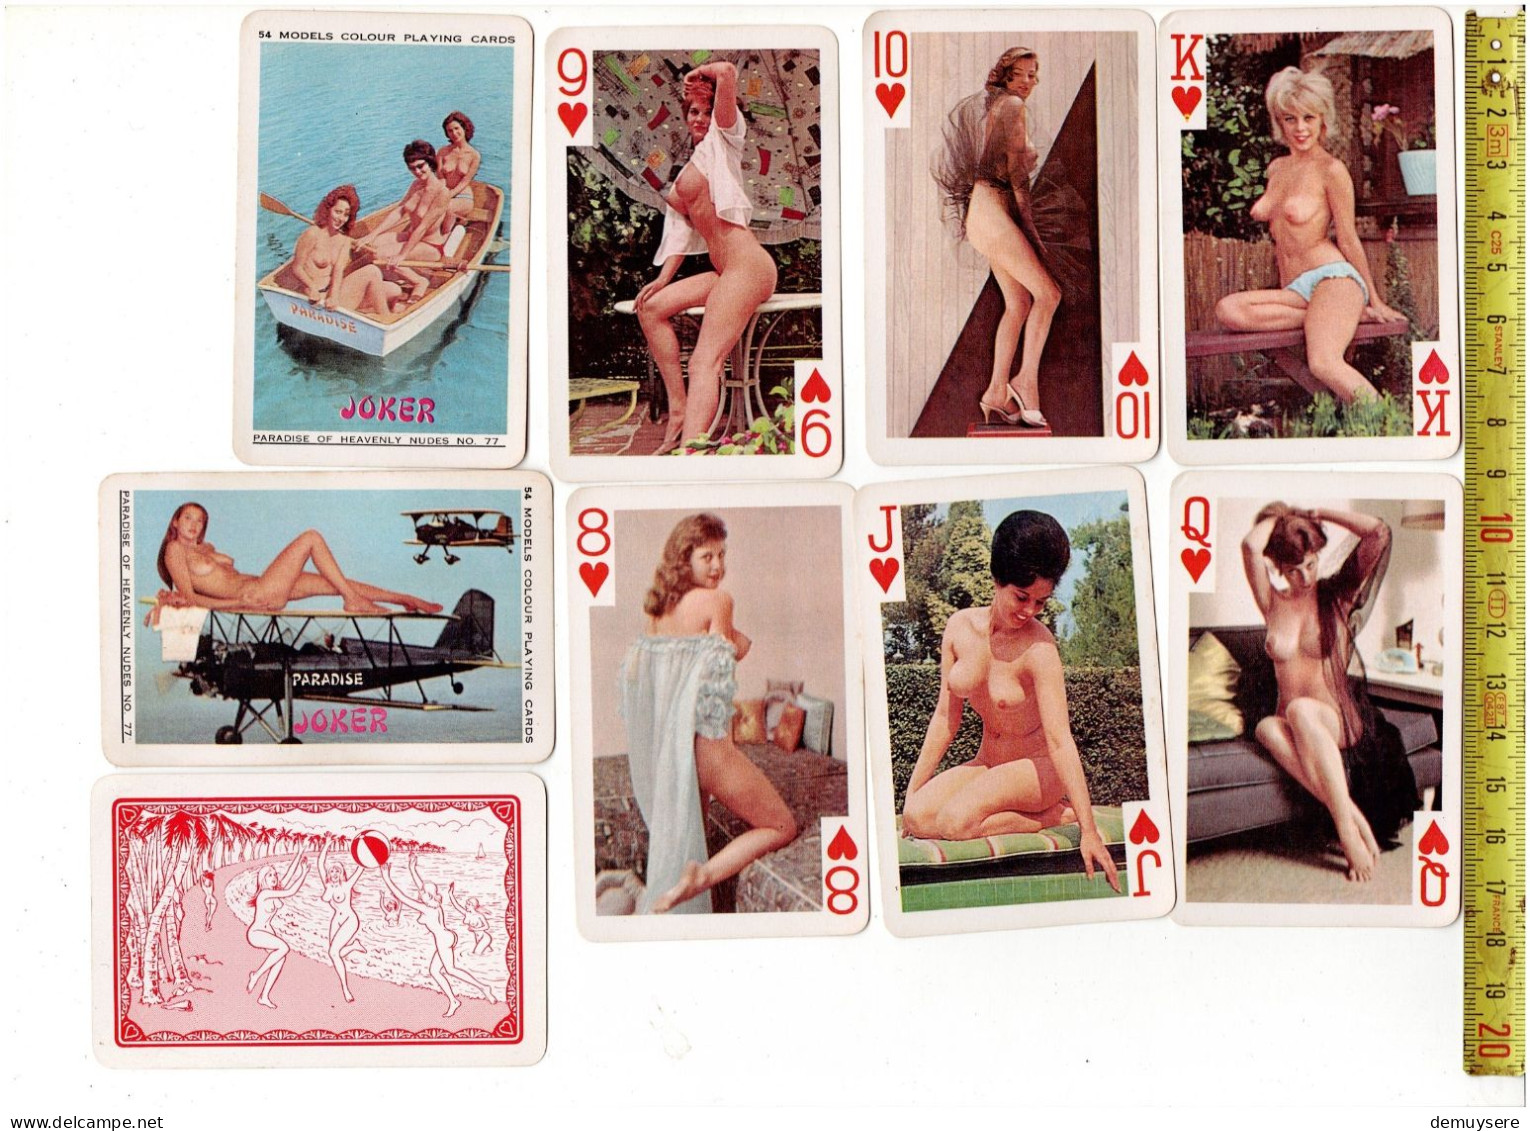 KL 3757 - MODELS COLOUR PLAYING CARDS - PARADISE OF HEAVENLY NUDES NO 77 - Barajas De Naipe